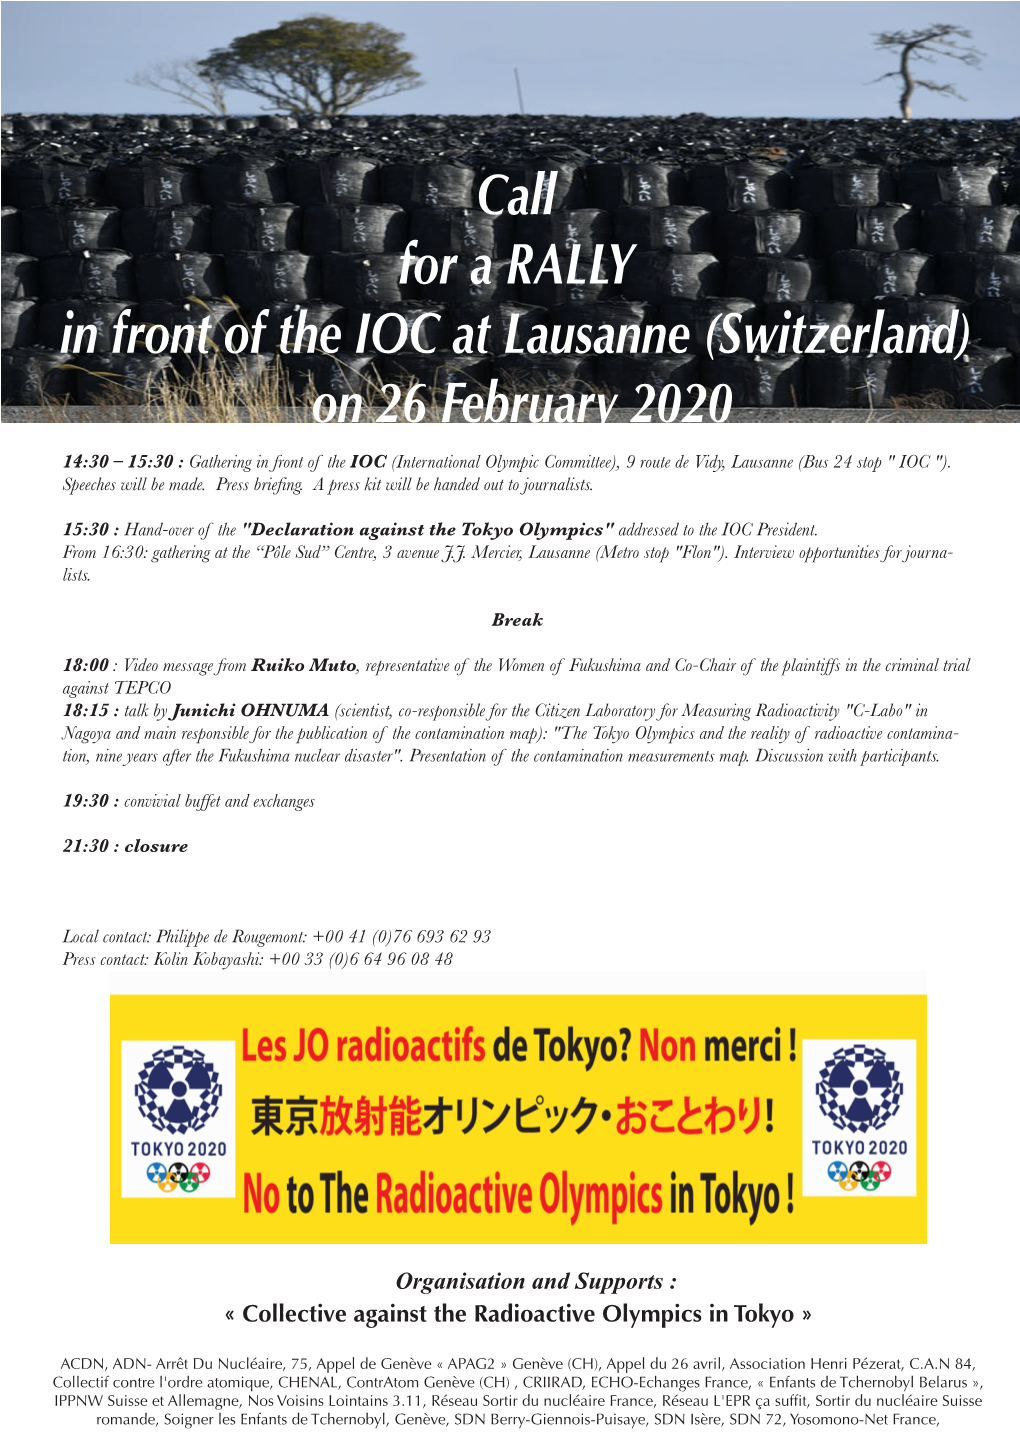 Call for a RALLY in Front of the IOC at Lausanne (Switzerland) on 26